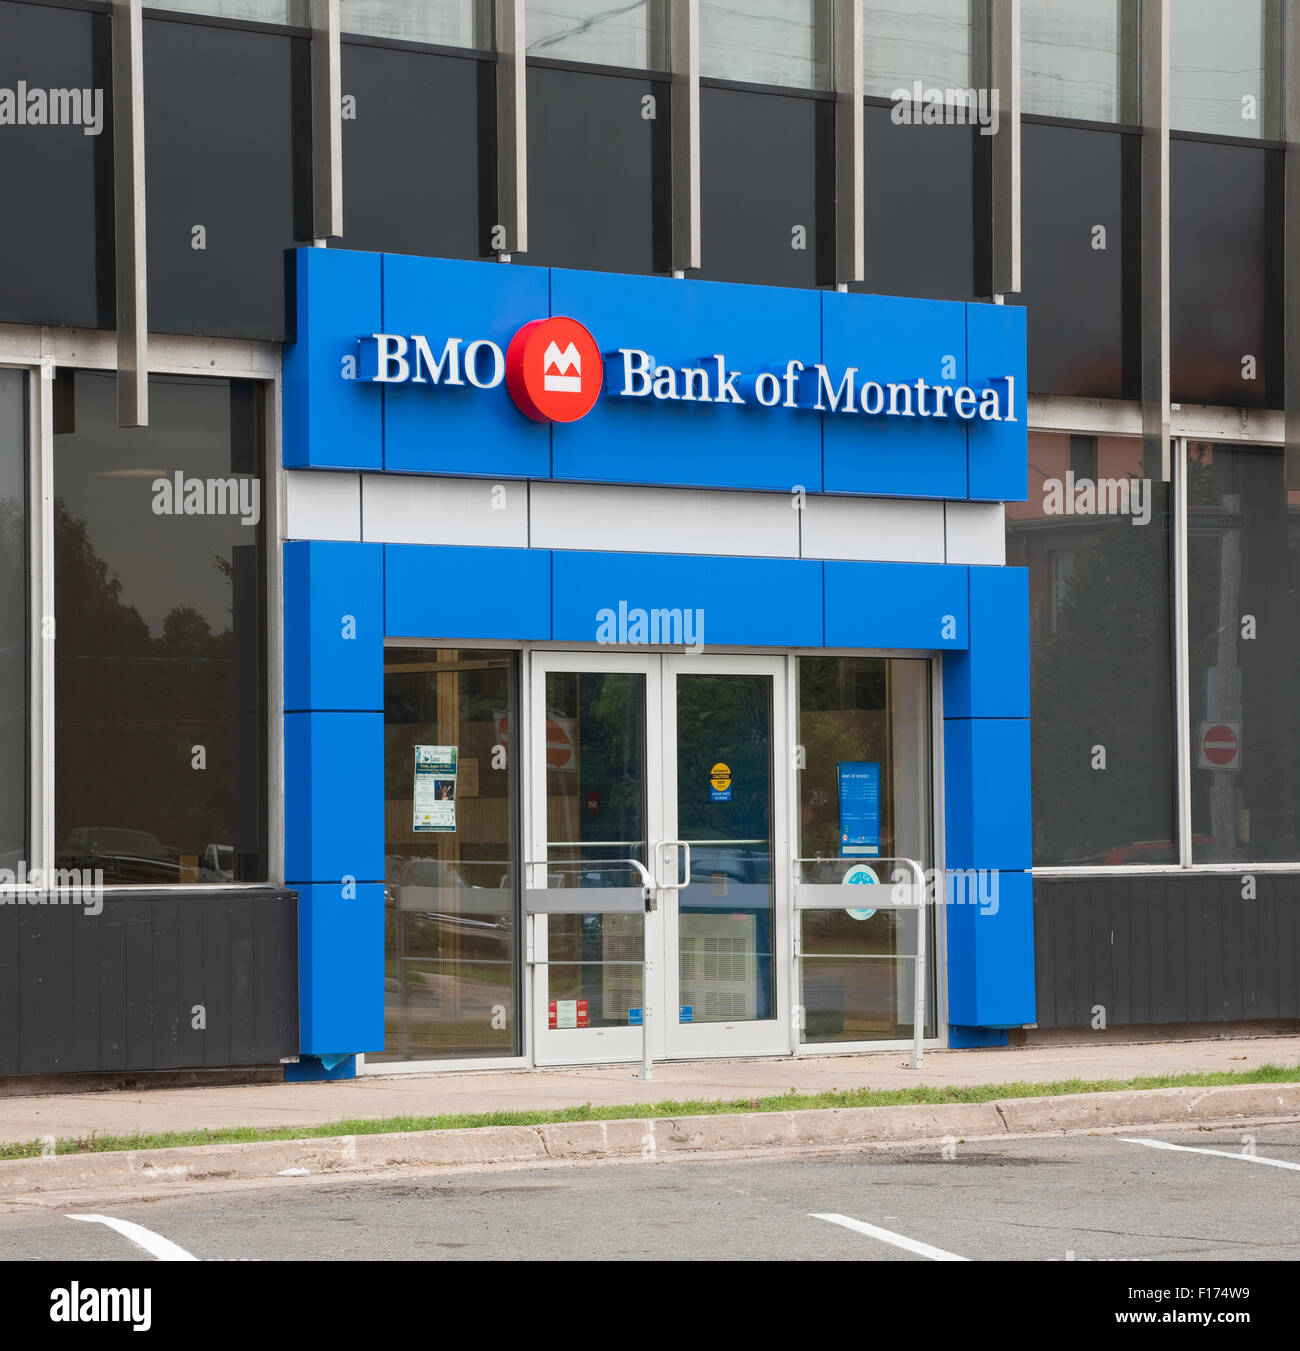 TRURO, CANADA - AUGUST 09, 2015: Bank of Montreal entrance. Stock Photo